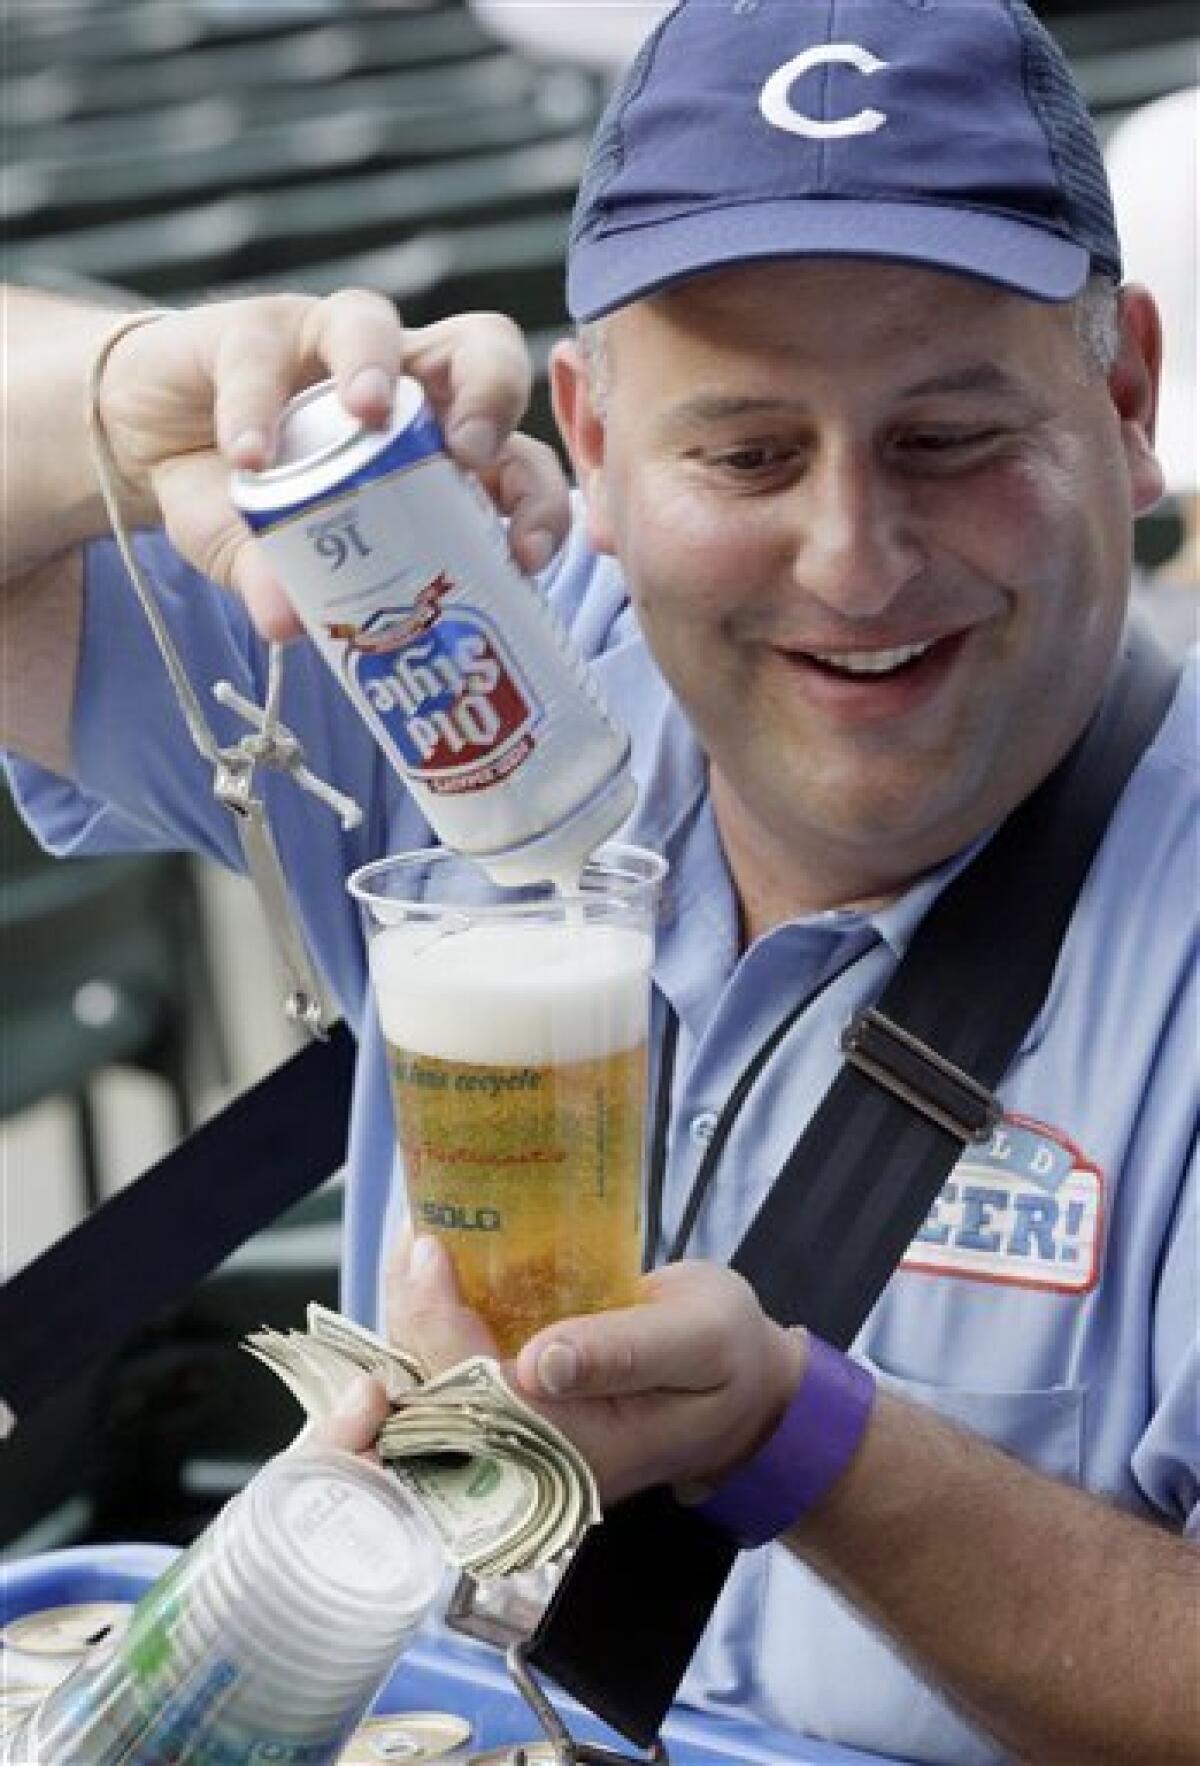 Cubs fans worry about losing _ Old Style beer - The San Diego